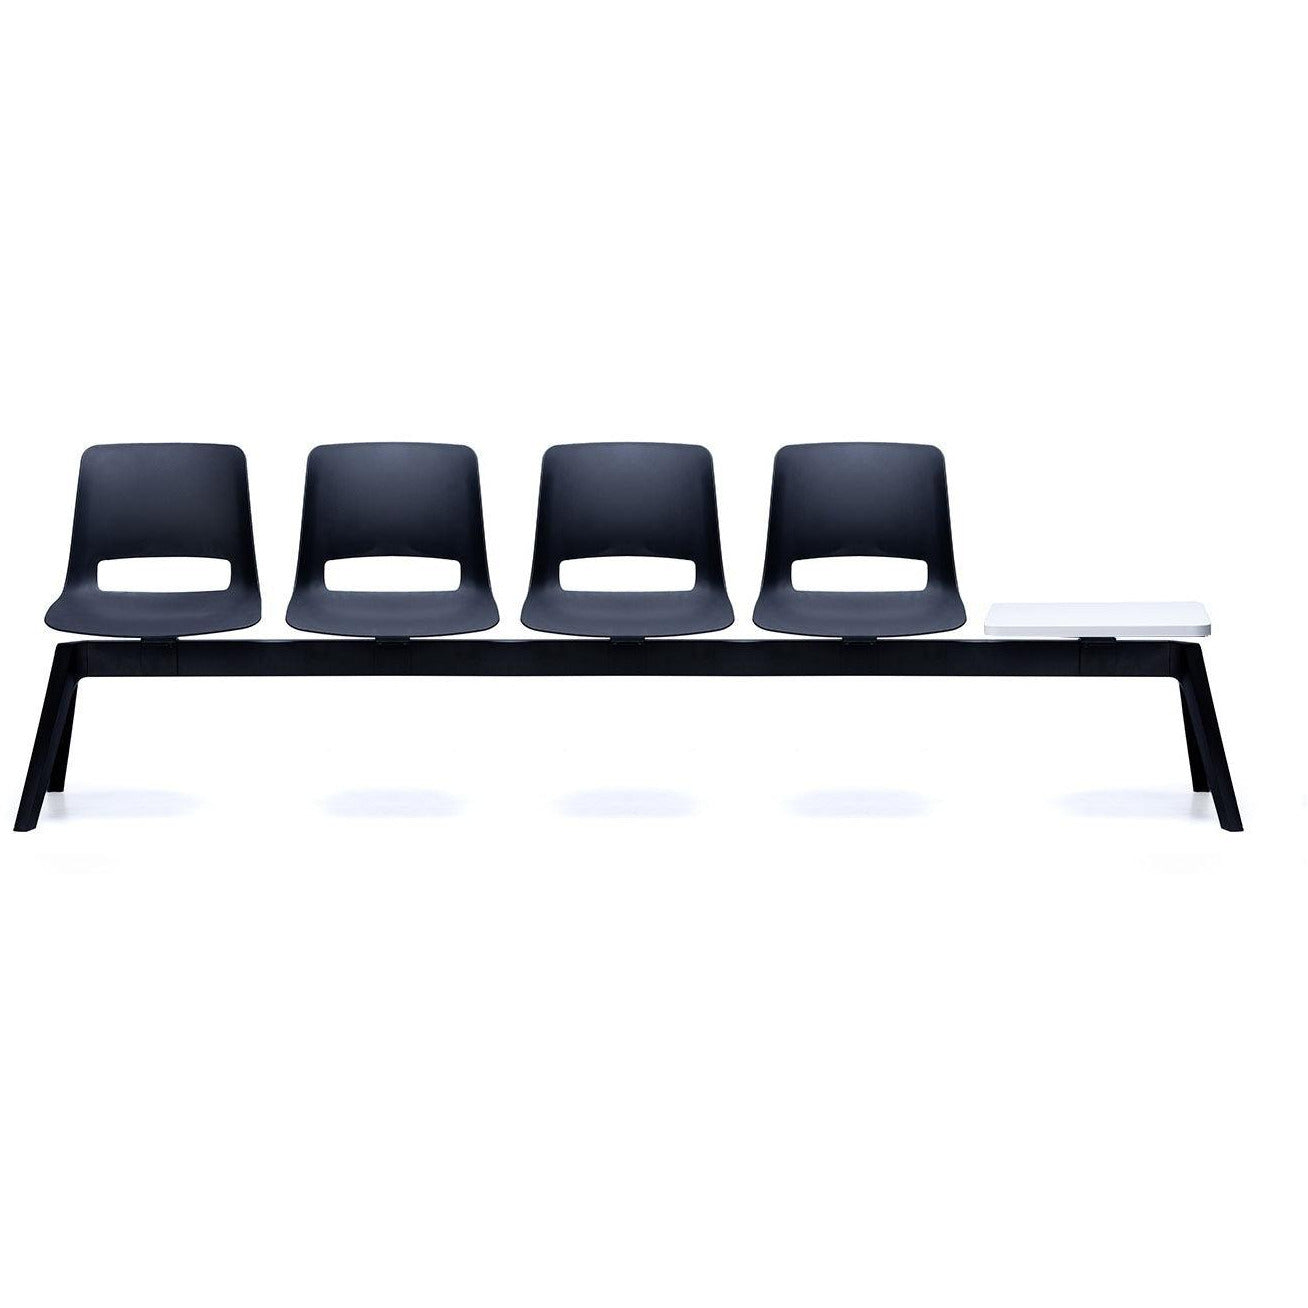 Unica PP 4 Seat Beam - Office Furniture Company 